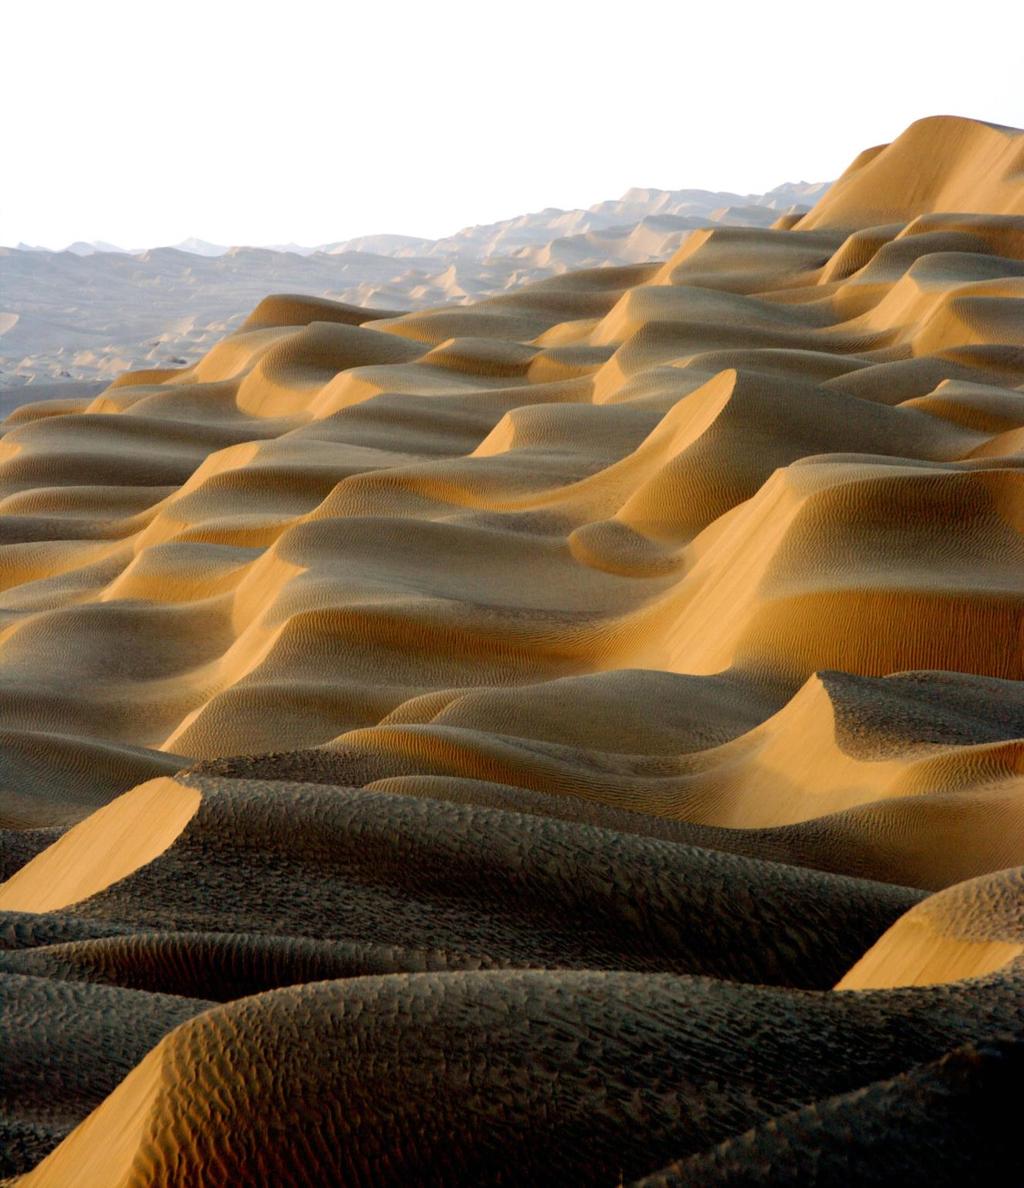 The Taklimakan Desert (takla-mahkahn) 1. is about 105,000 square miles. It is considered one of the most dangerous deserts in the world. In fact, its name means, Once you go in, you will not come out.